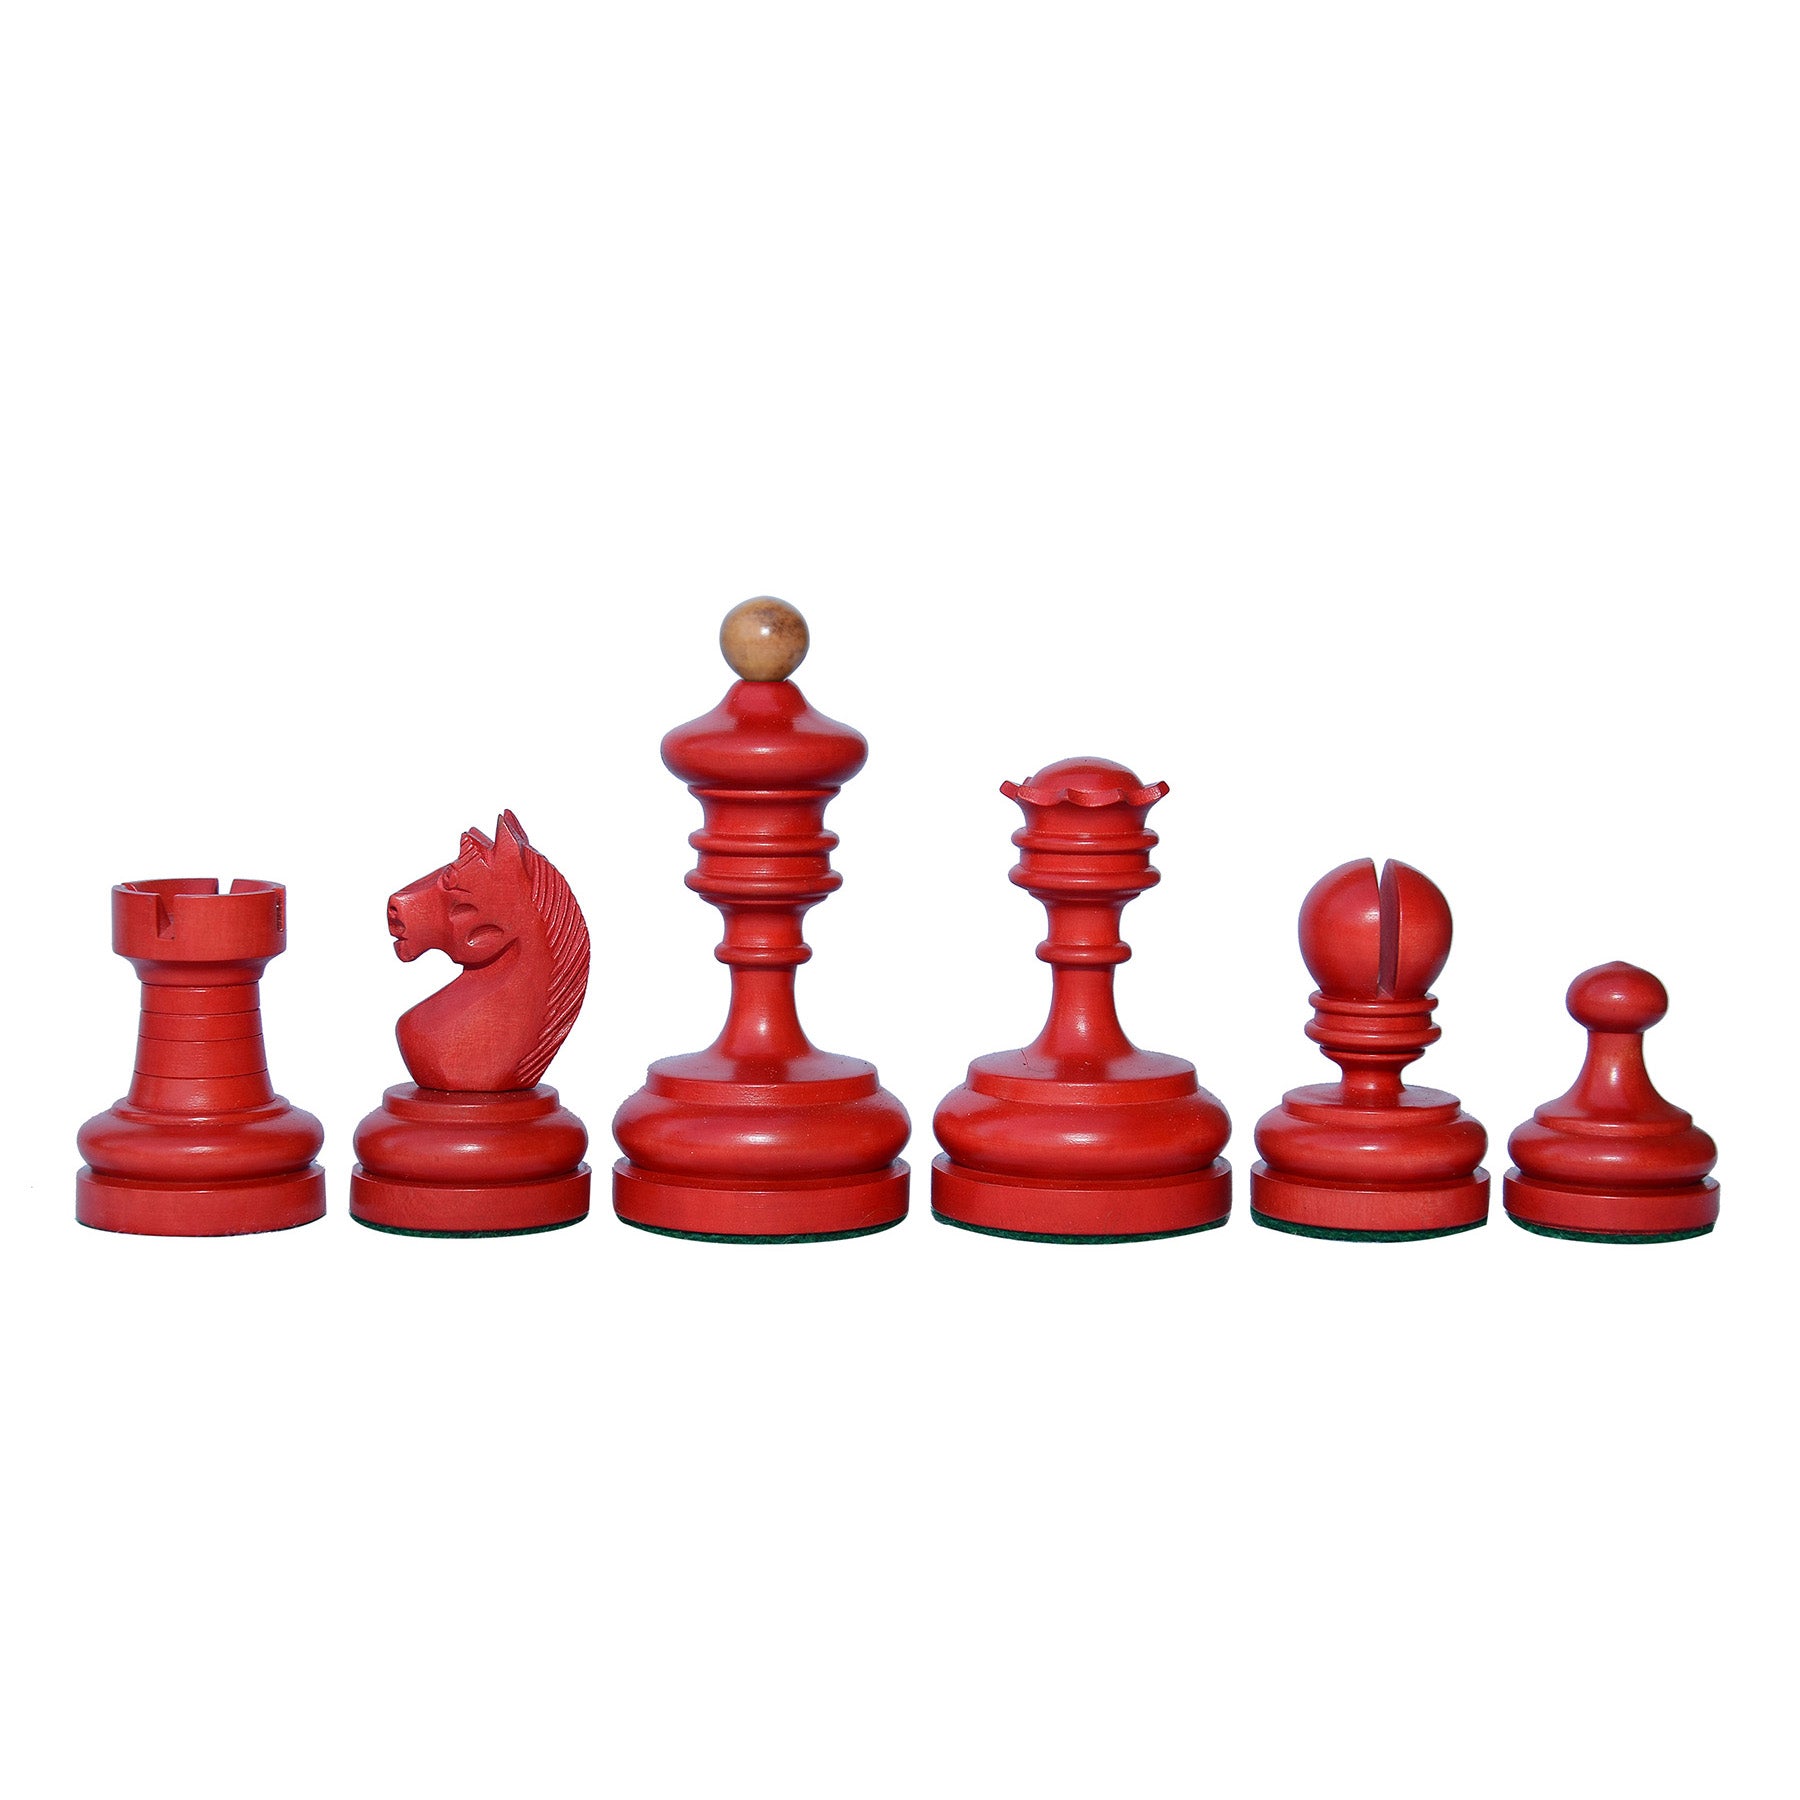 Reproduction Vintage 1930 German Knubbel 3.5" Chess Pieces in Distressed Antique and Red Stained Box wood